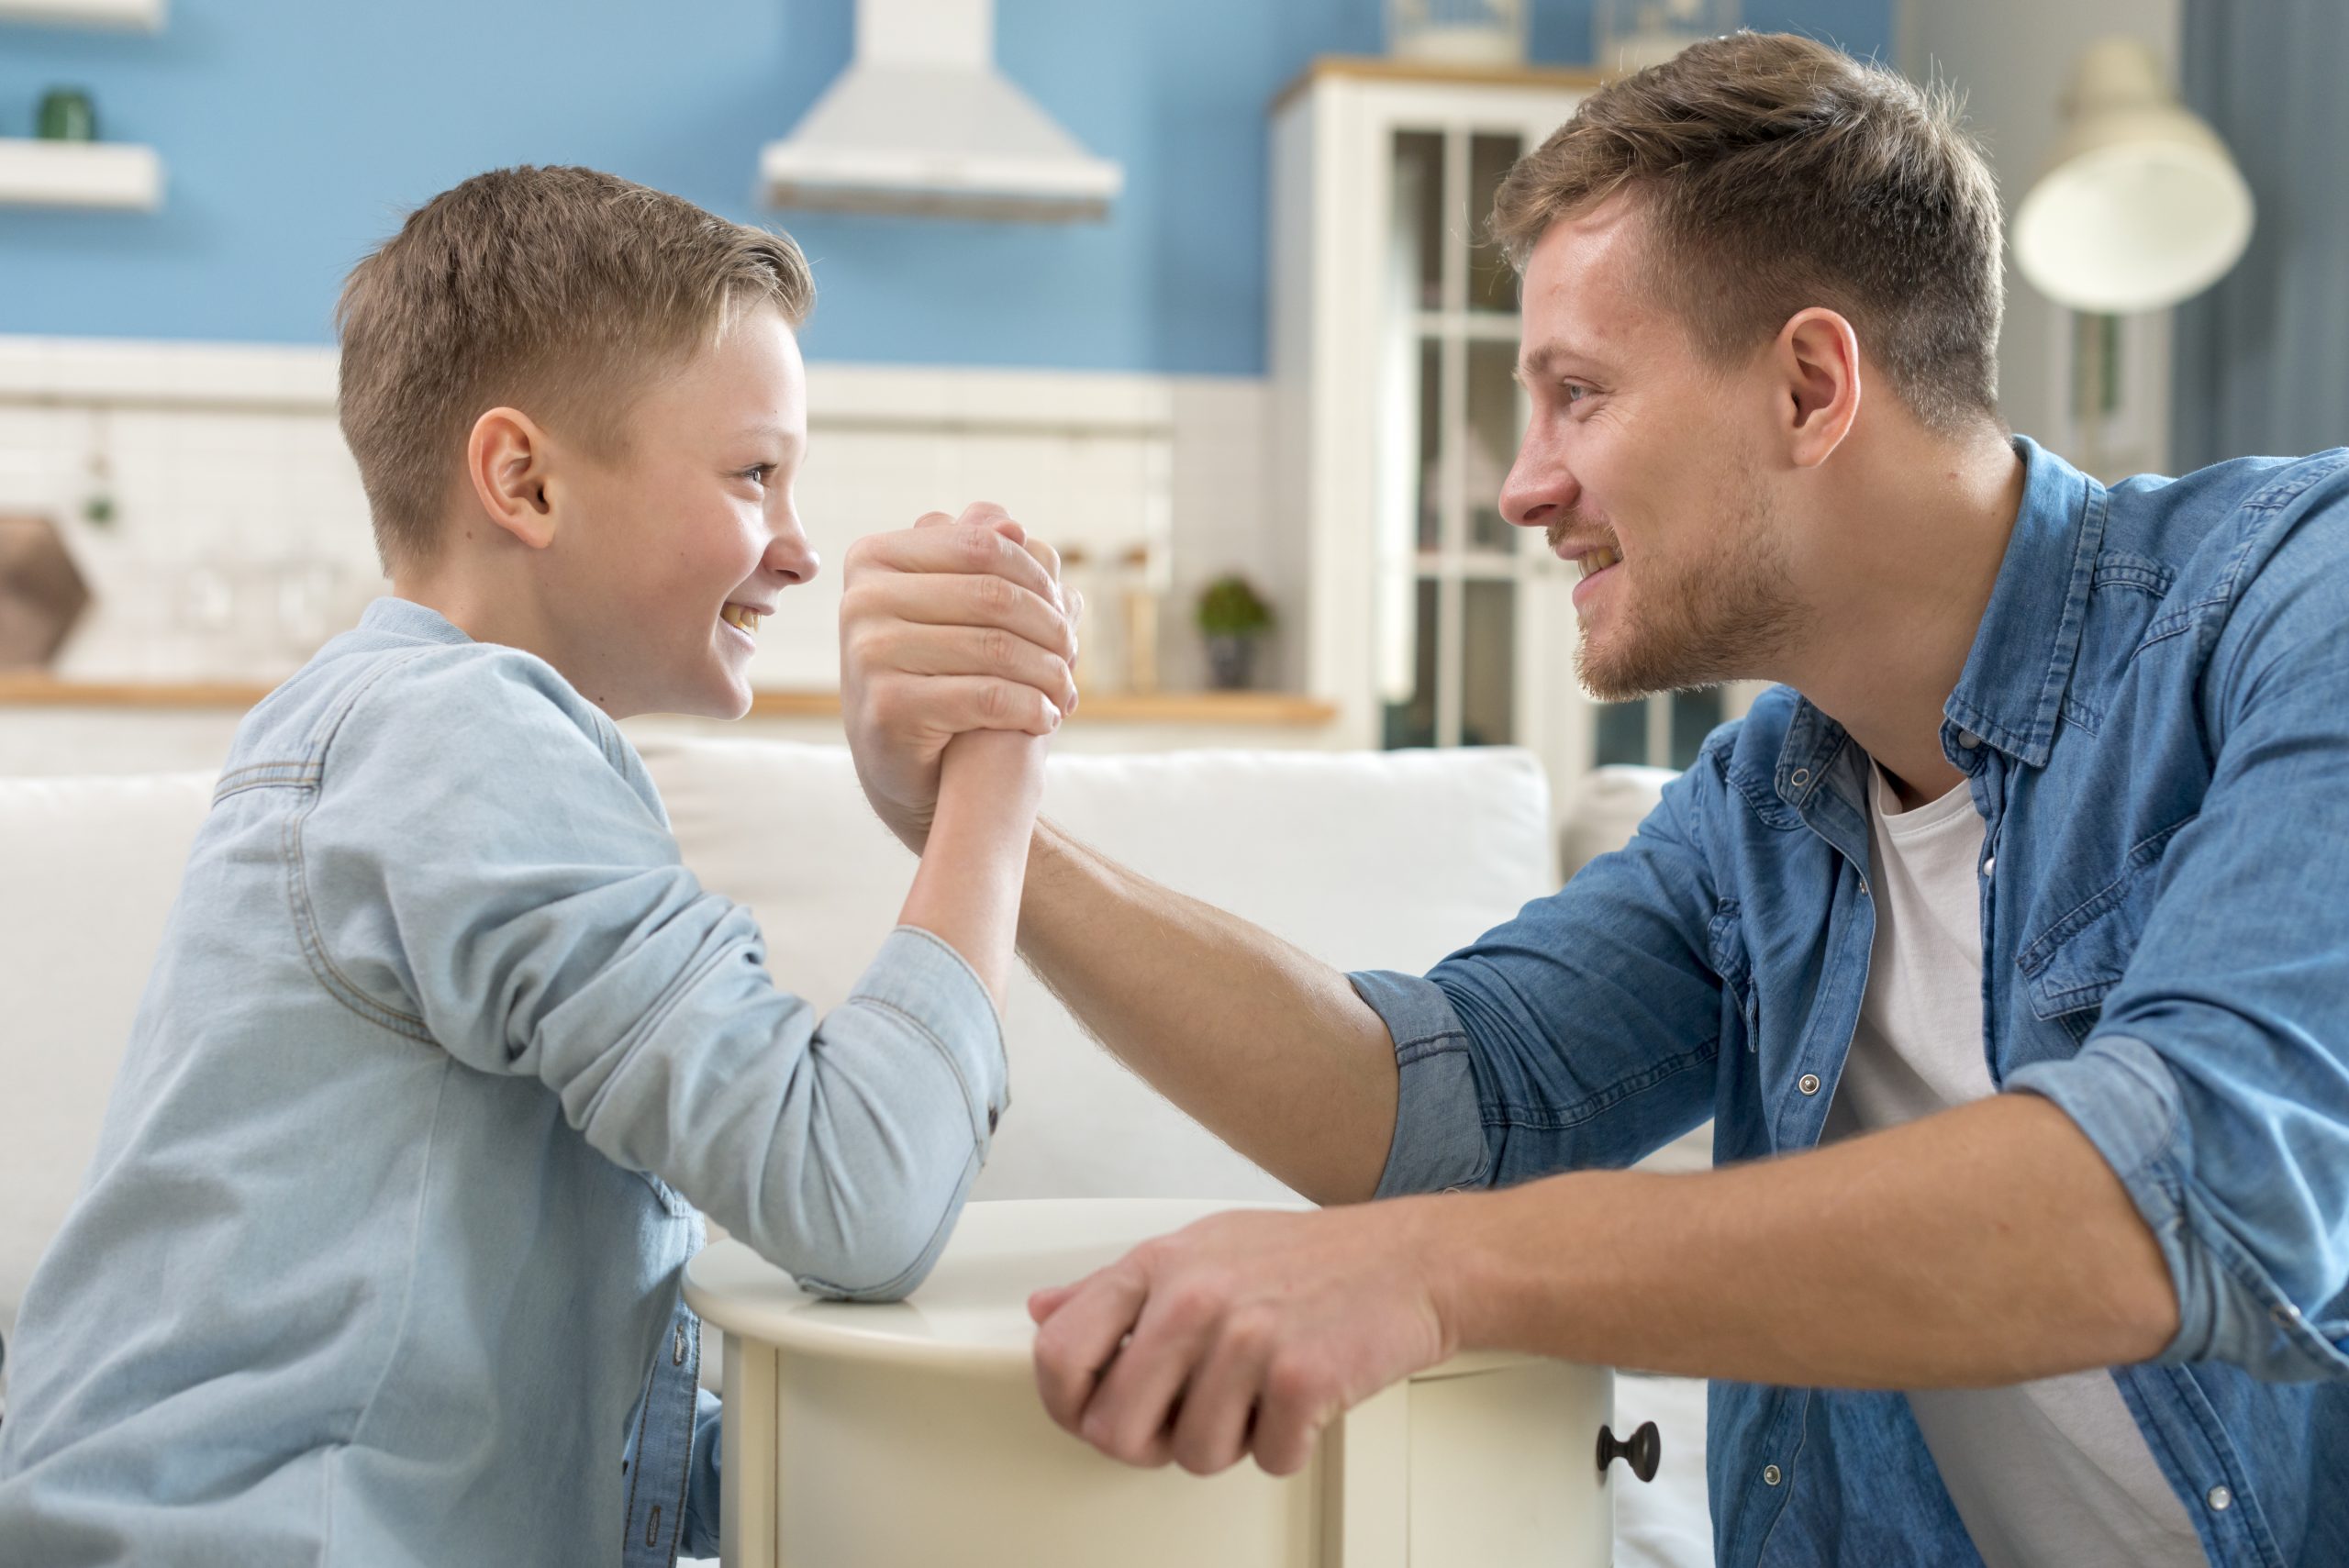 Father and son smiling and arm wrestling, bonding in a bright home setting. 